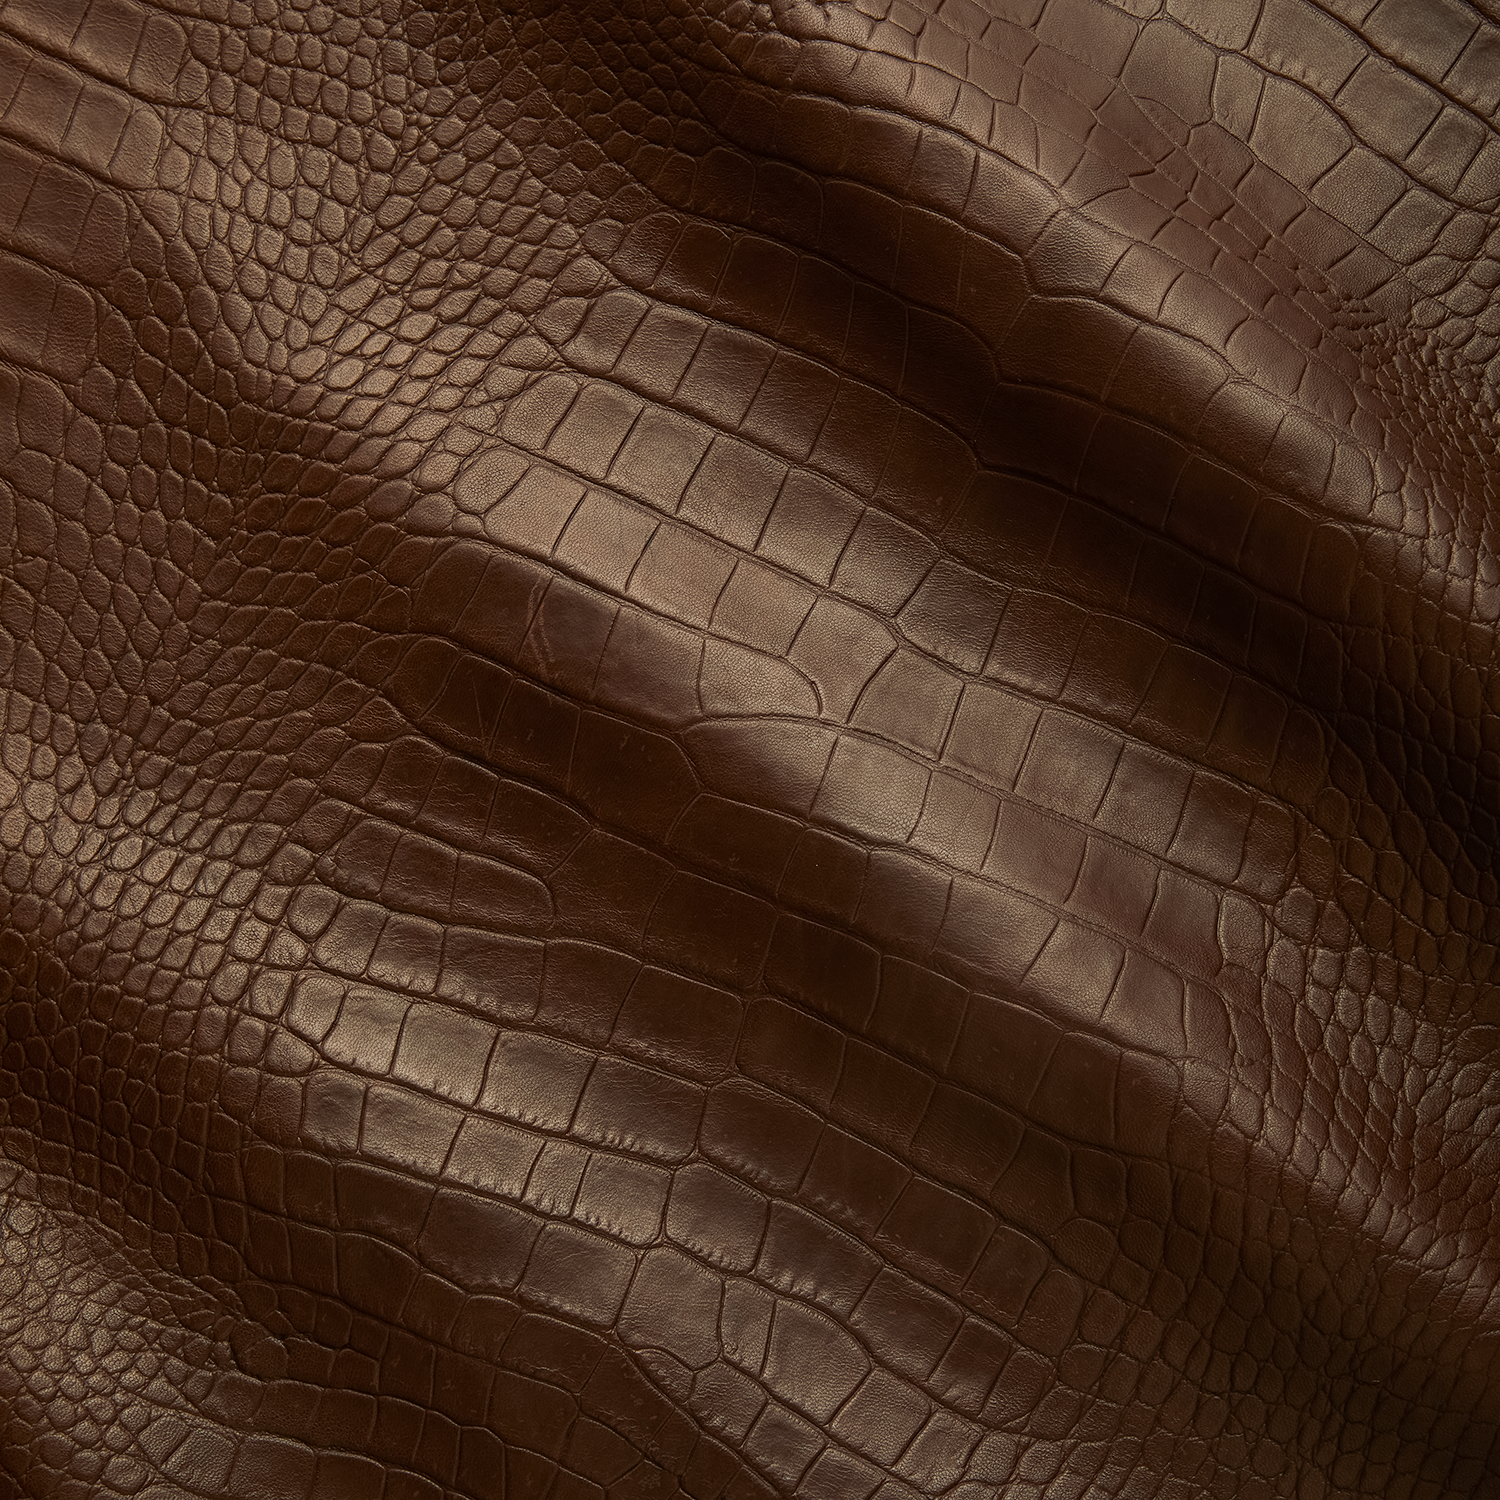 Dark Brown Soft Skin Faux Leather Upholstery Apparel Vinyl Fabric